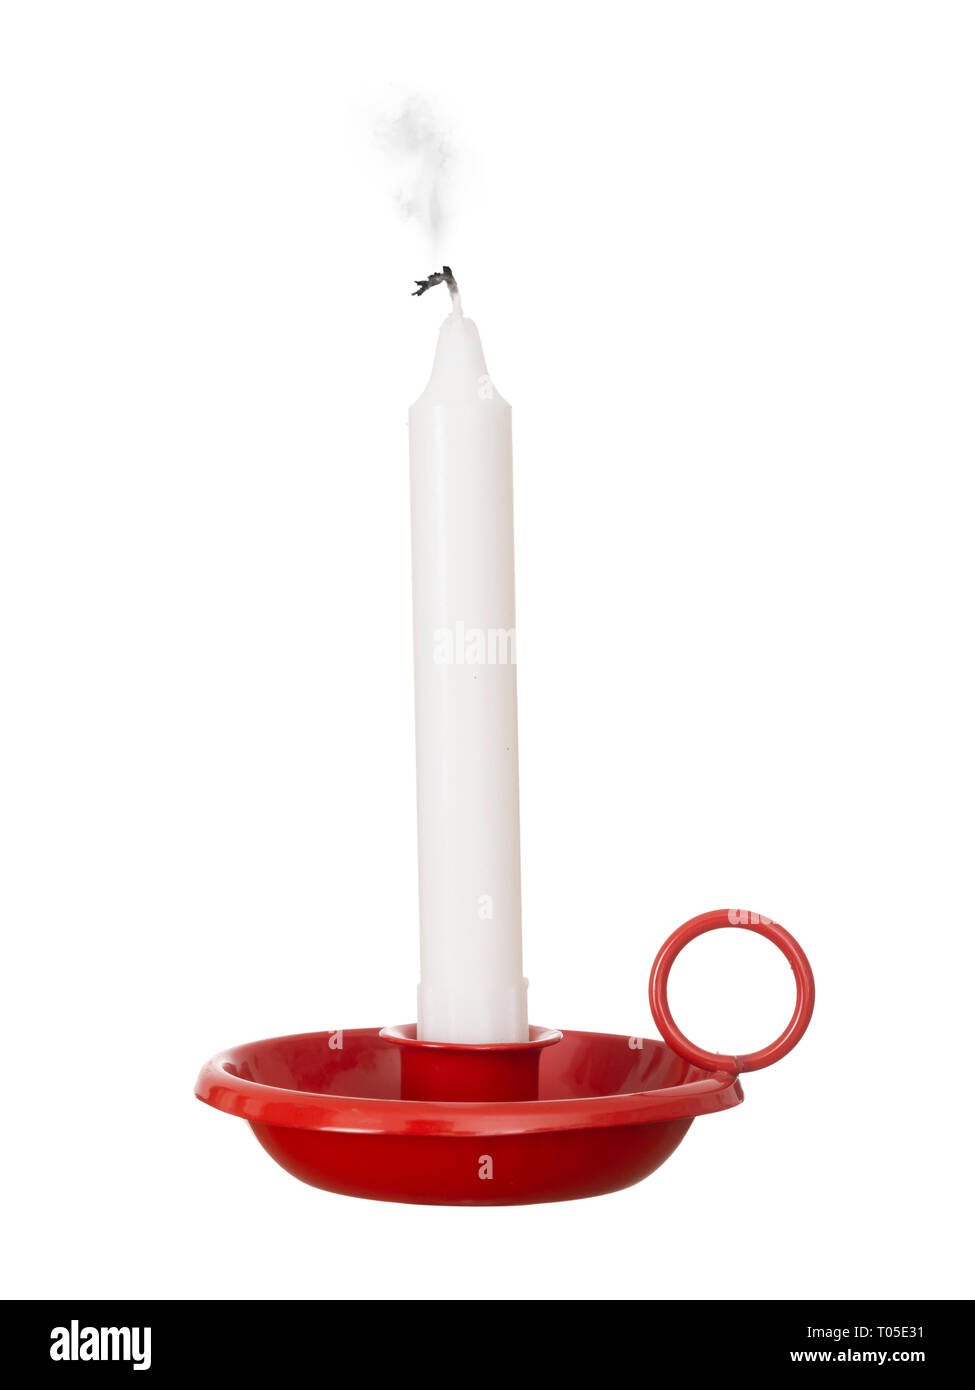 Snuffed out white domestic candle, isolated on white background. Literal or hopes extinguished metaphor. Stock Photo